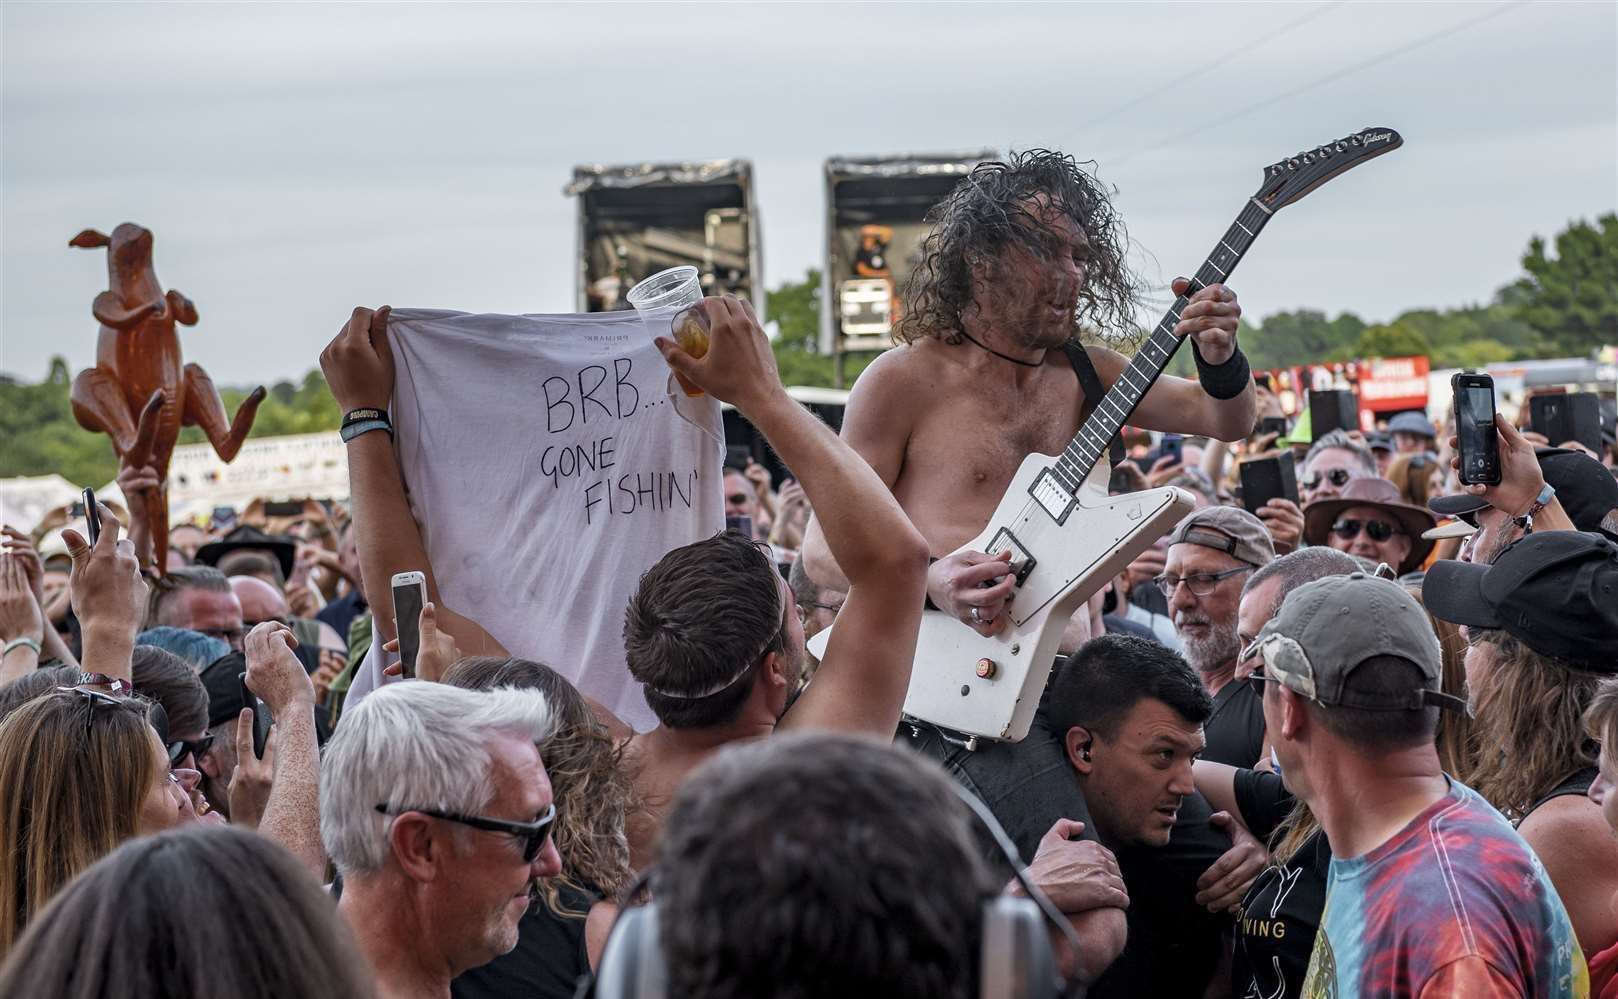 Maid of Stone is the newest festival for rock fans in Kent. Picture: Chris White